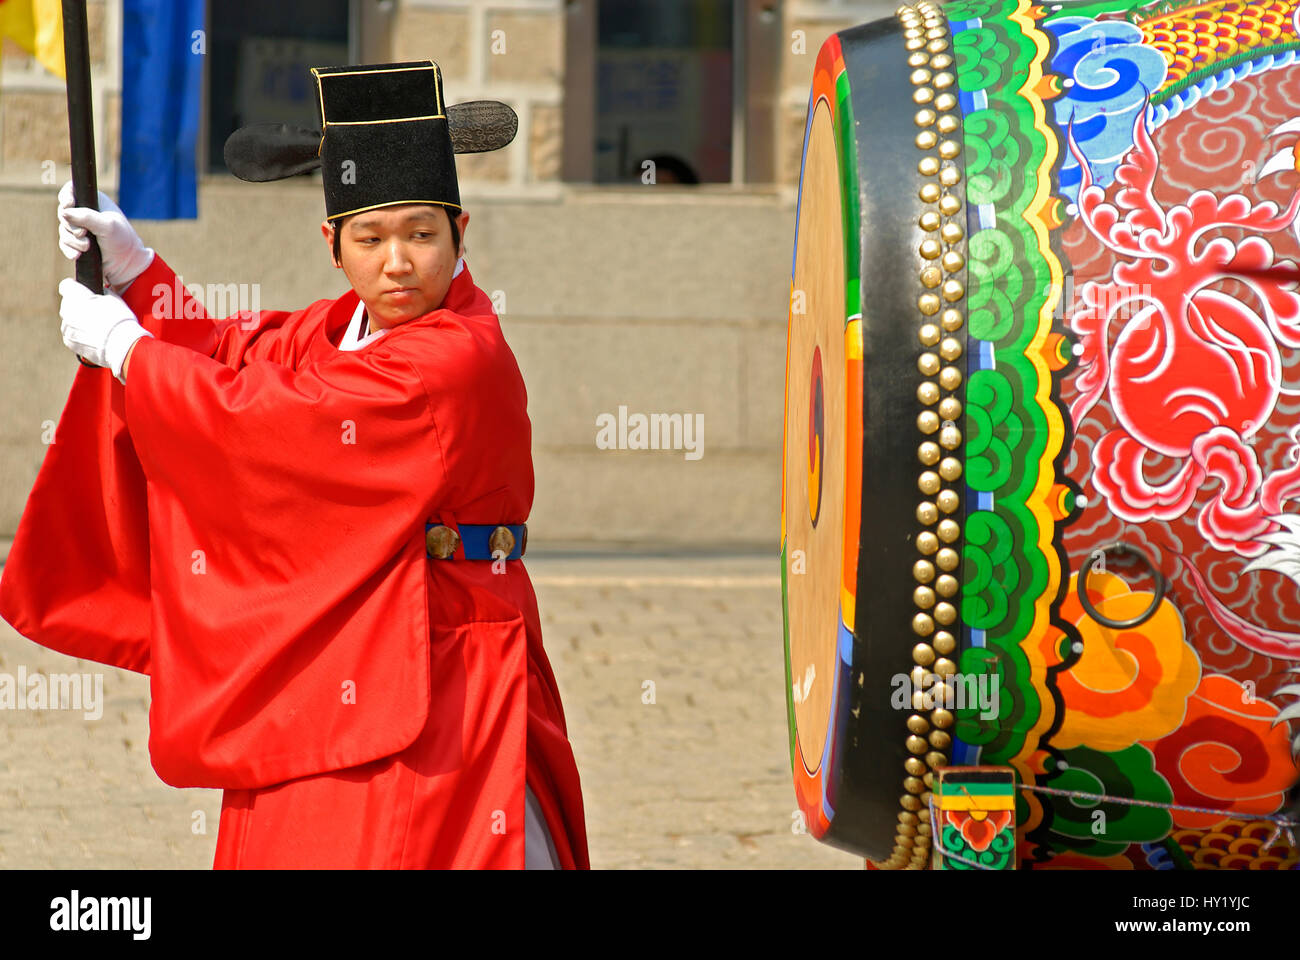 Image of a Korean Drummer in traditional costume performing during the royal guard rotation at the Gyeongbokgung Palace in Seoul, South Korea. Stock Photo